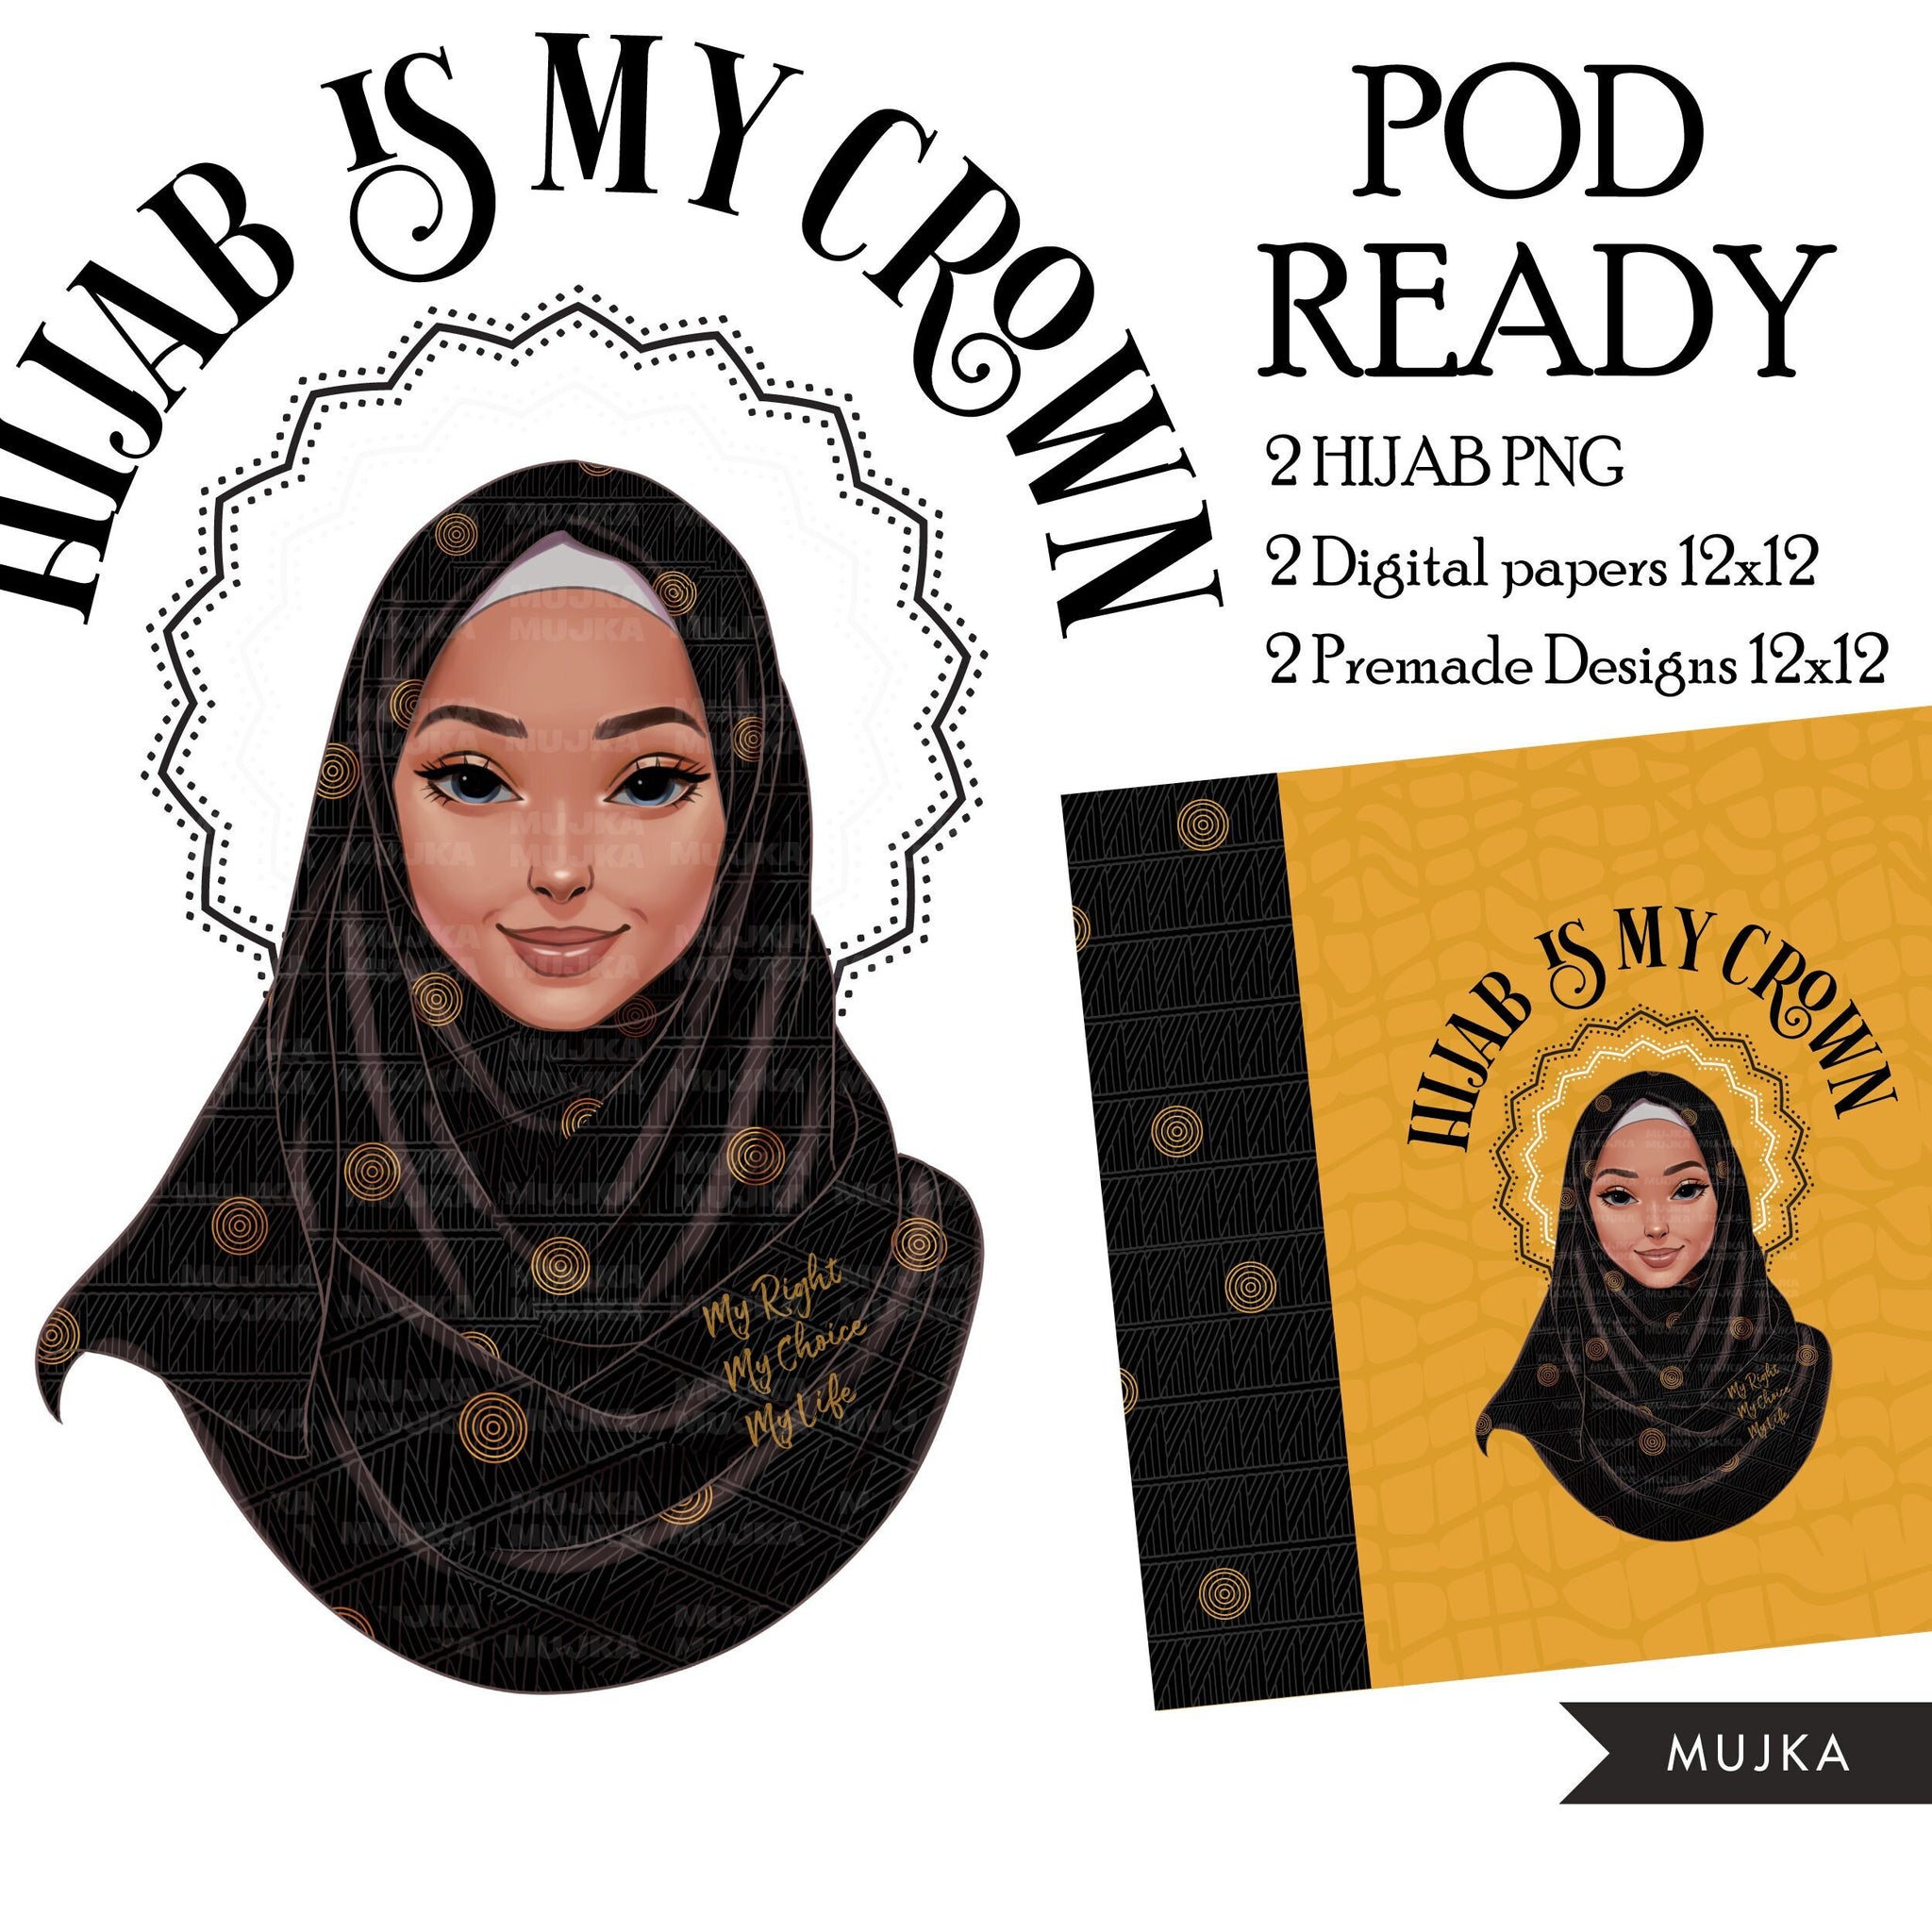 Hijab is my Crown PNG, Muslim woman clipart, living my best life sublimation designs, Muslim headscarf, Islamic graphics, pod ready png, religious